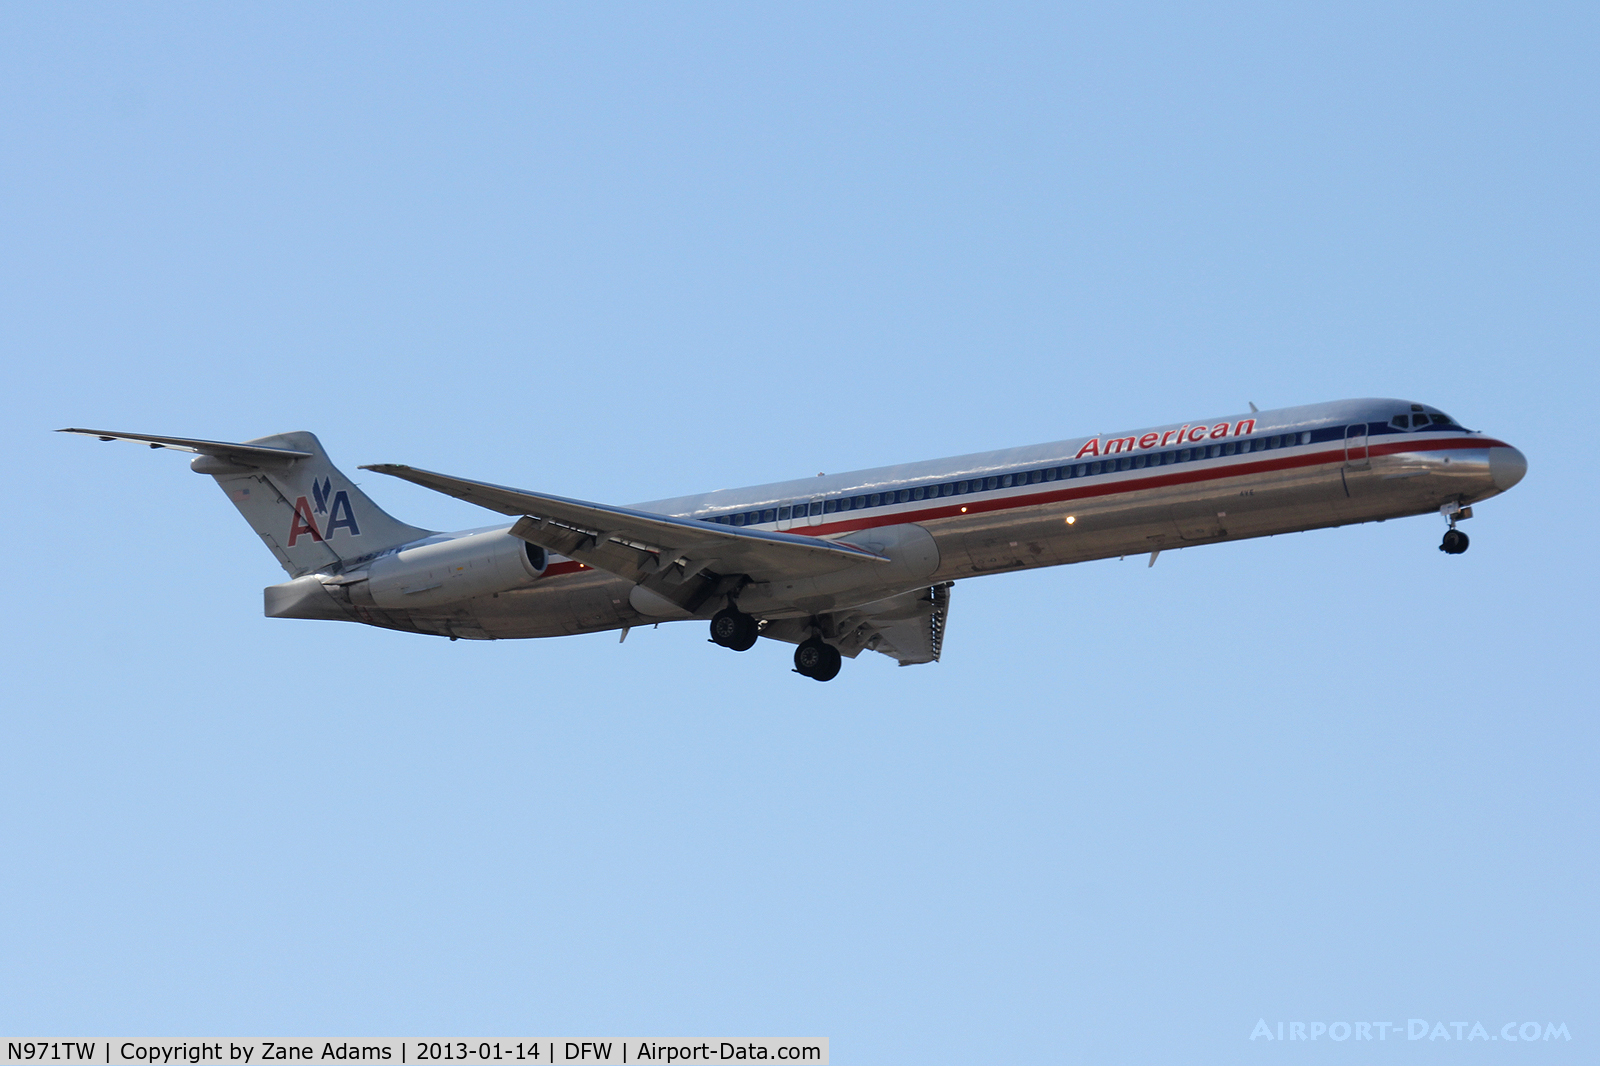 N971TW, 1999 McDonnell Douglas MD-83 (DC-9-83) C/N 53621, American Airlines landing at DFW Airport